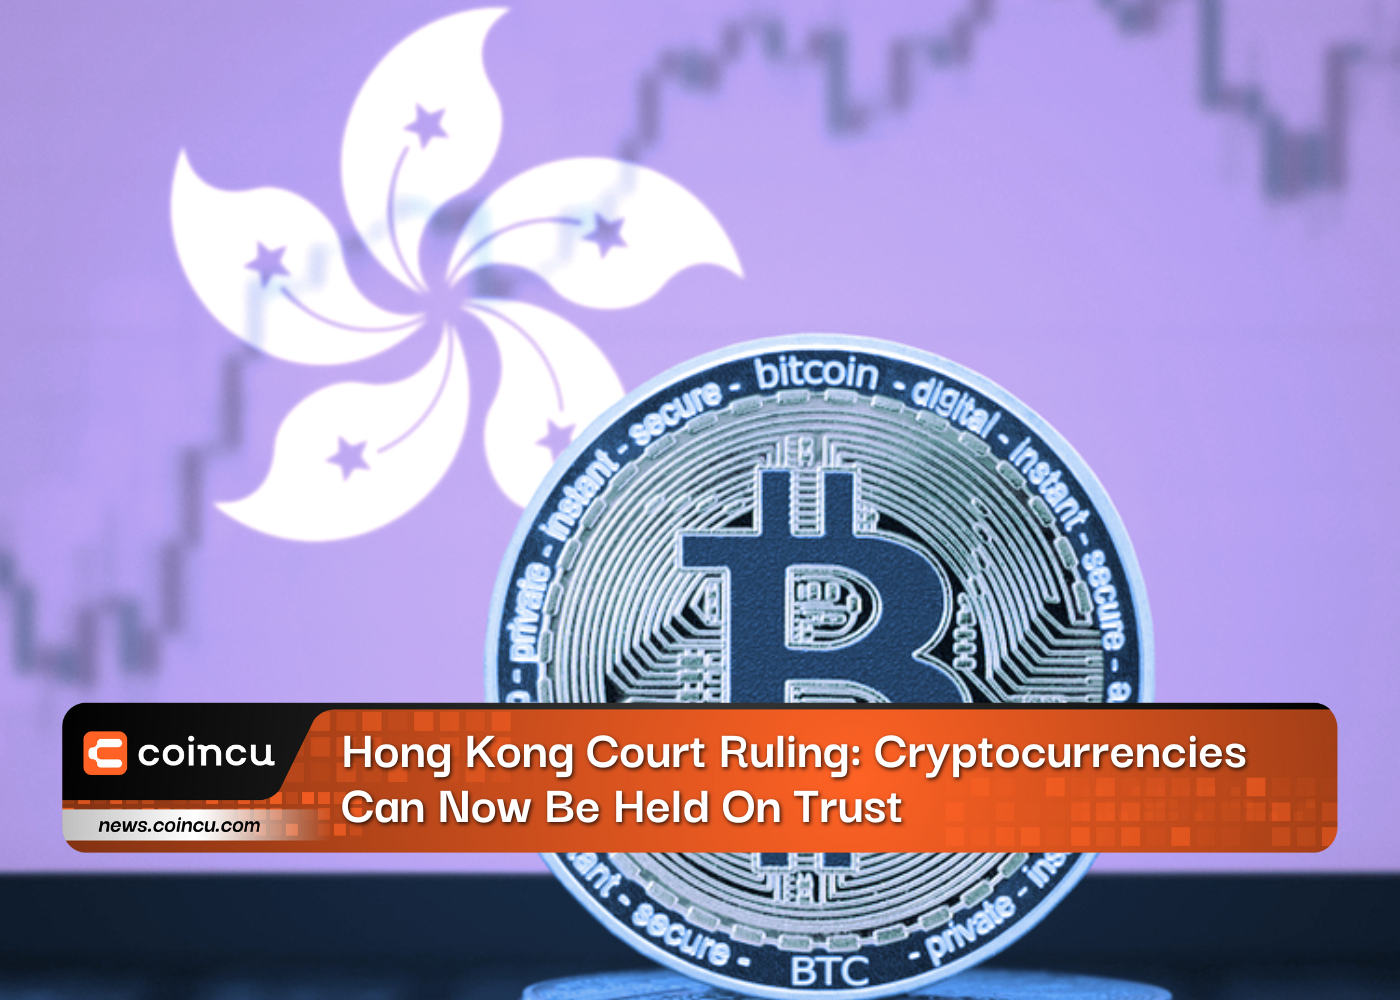 Hong Kong Court Ruling: Cryptocurrencies Can Now Be Held On Trust